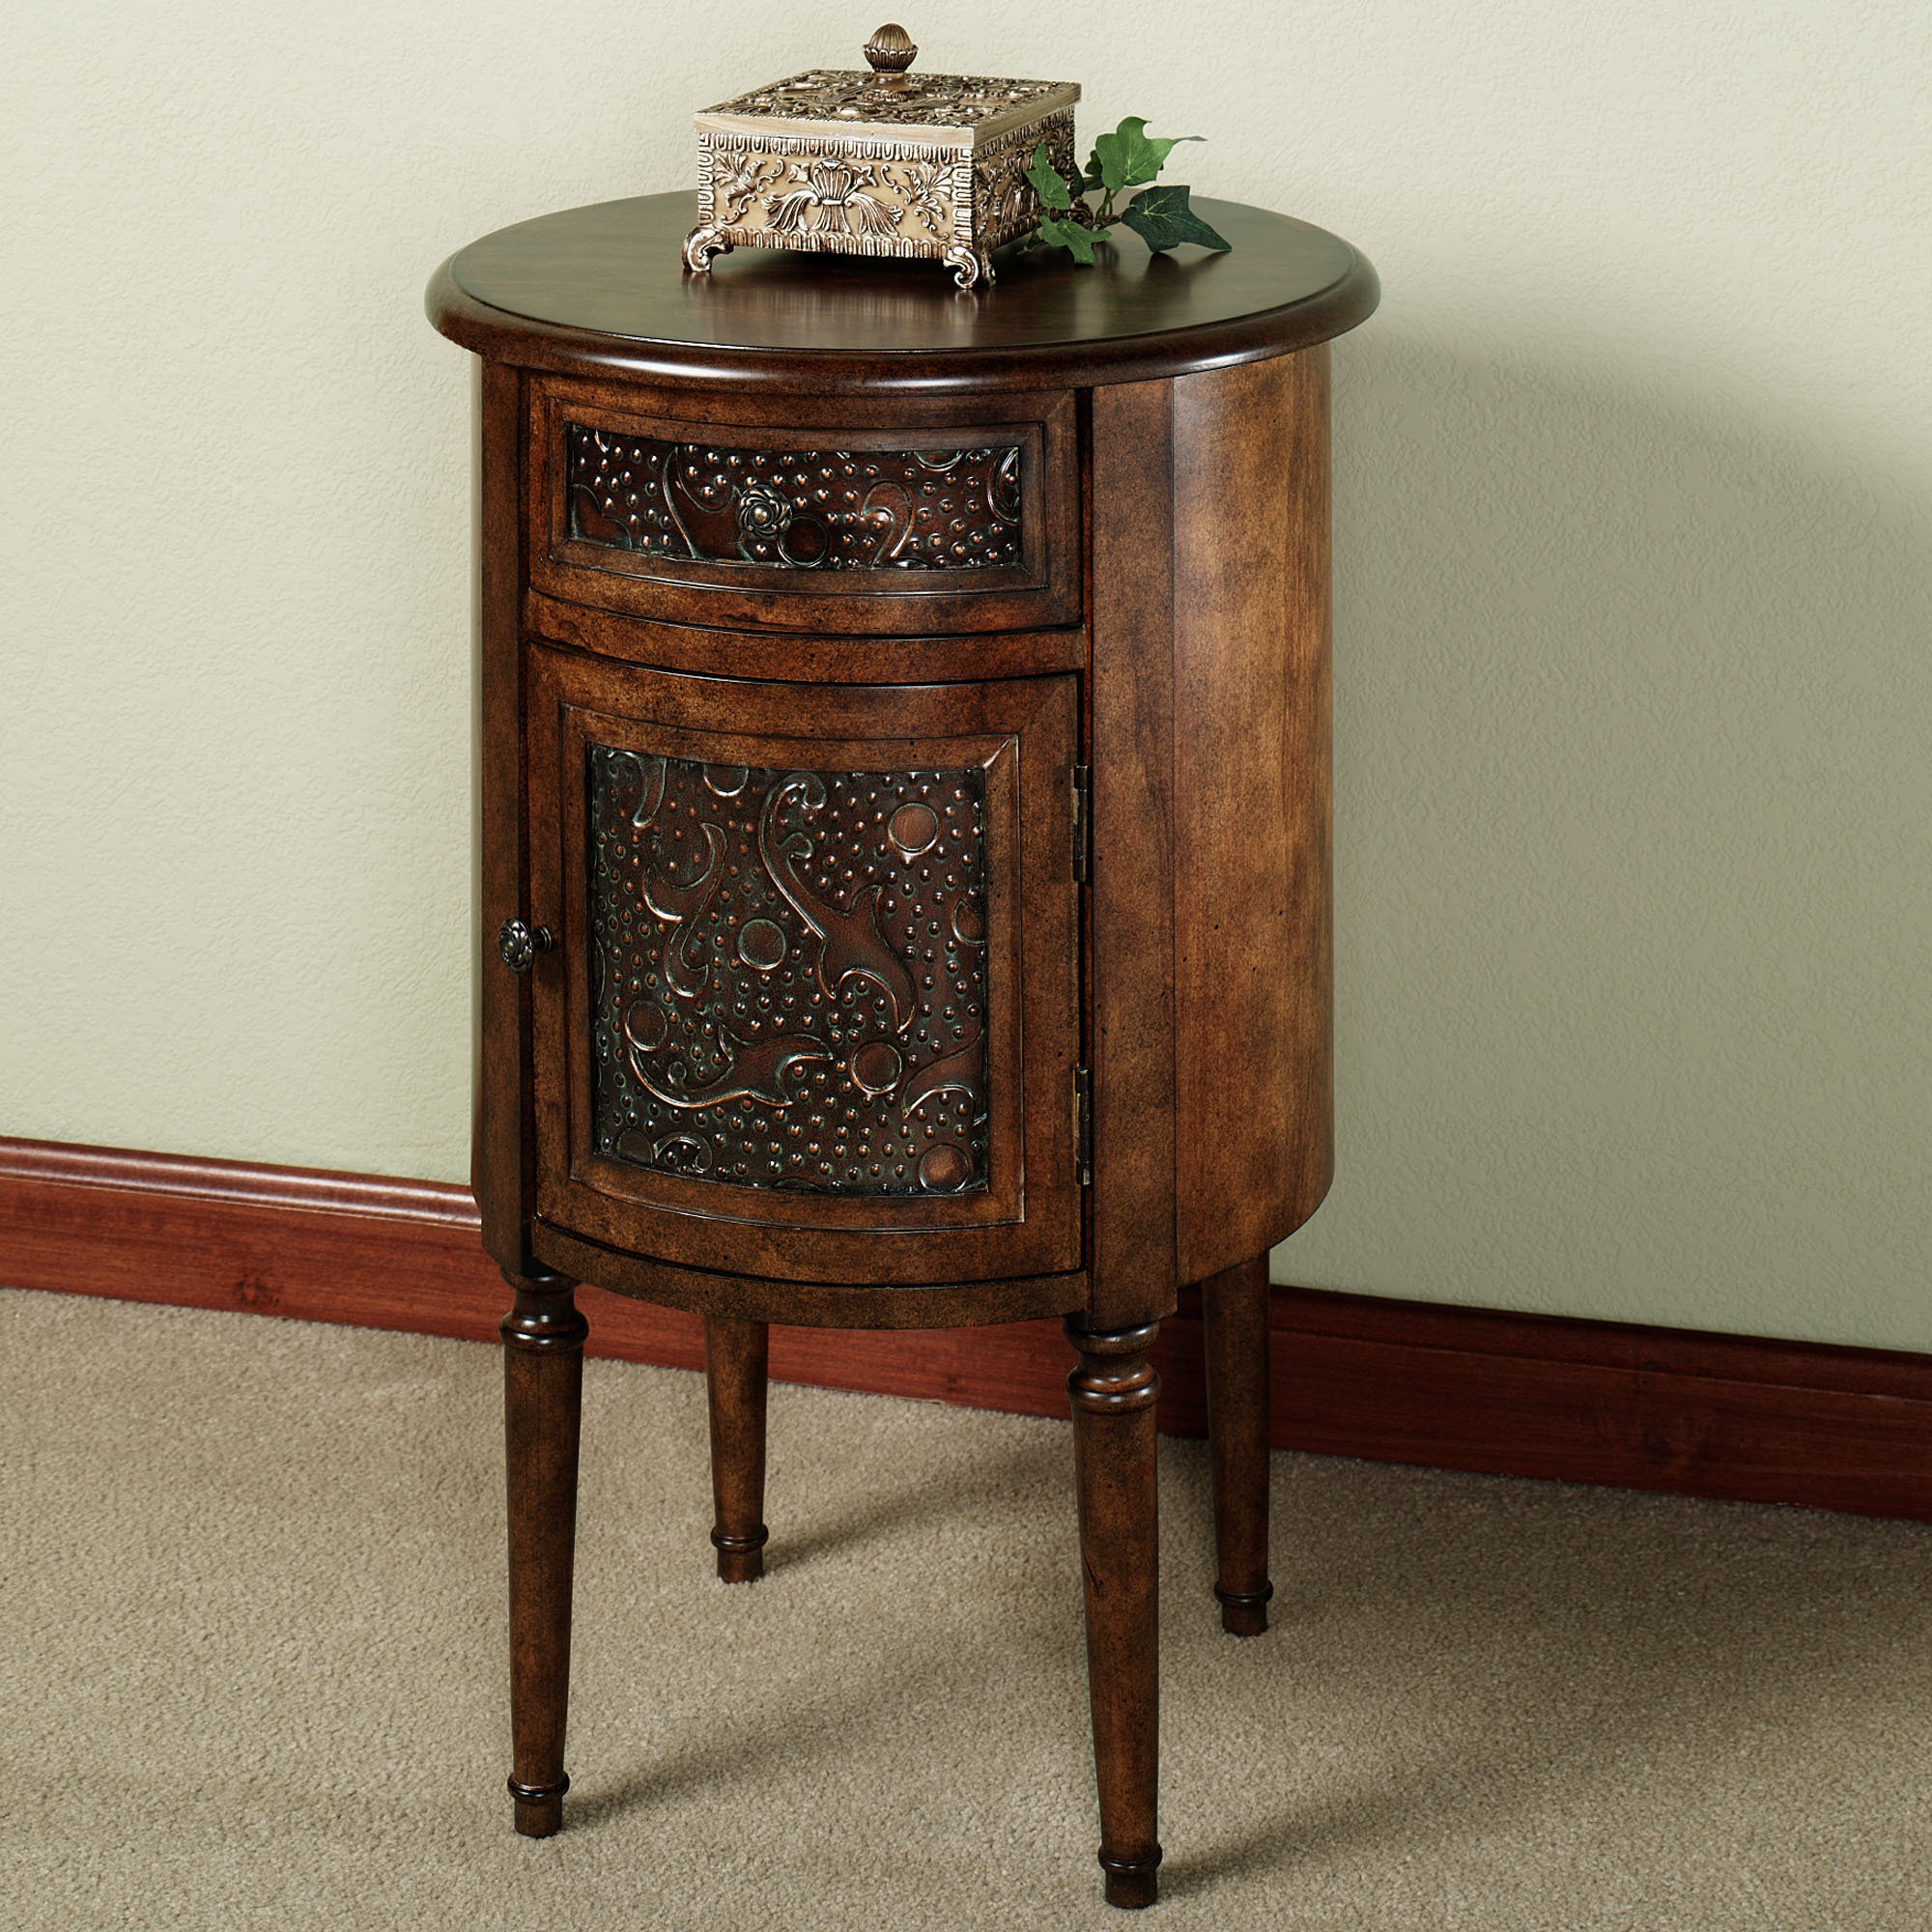 kohls offers the outrageous beautiful end table with curved legs design wood accent home and incredible industrial style tables pedestal papa bear chair low black coffee cherry